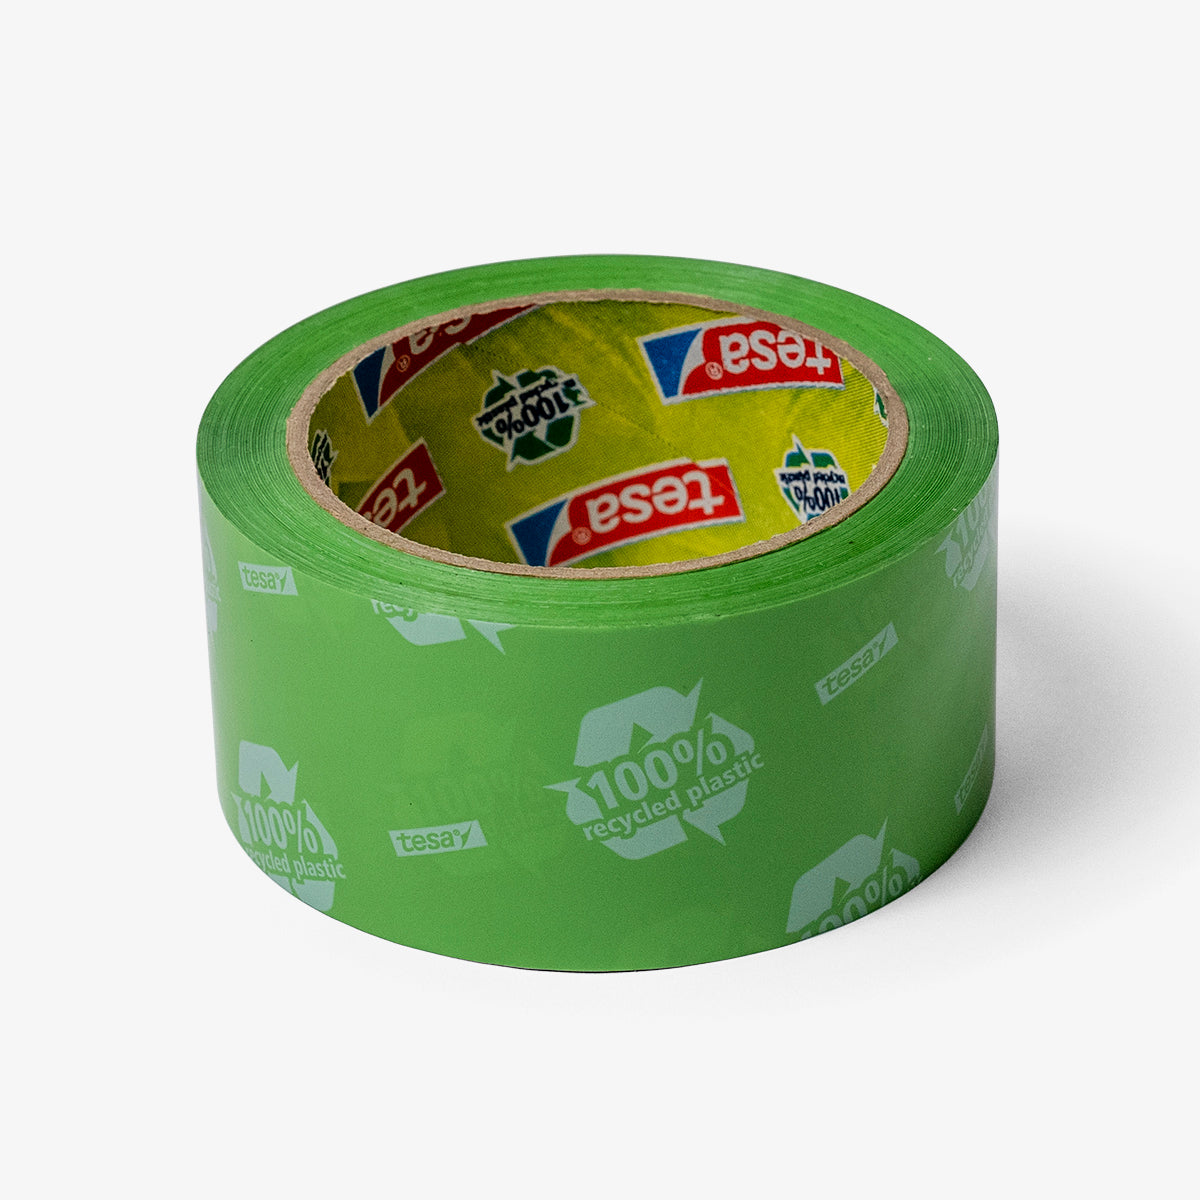 Green Packaging Tape | 100% Recycled Plastic